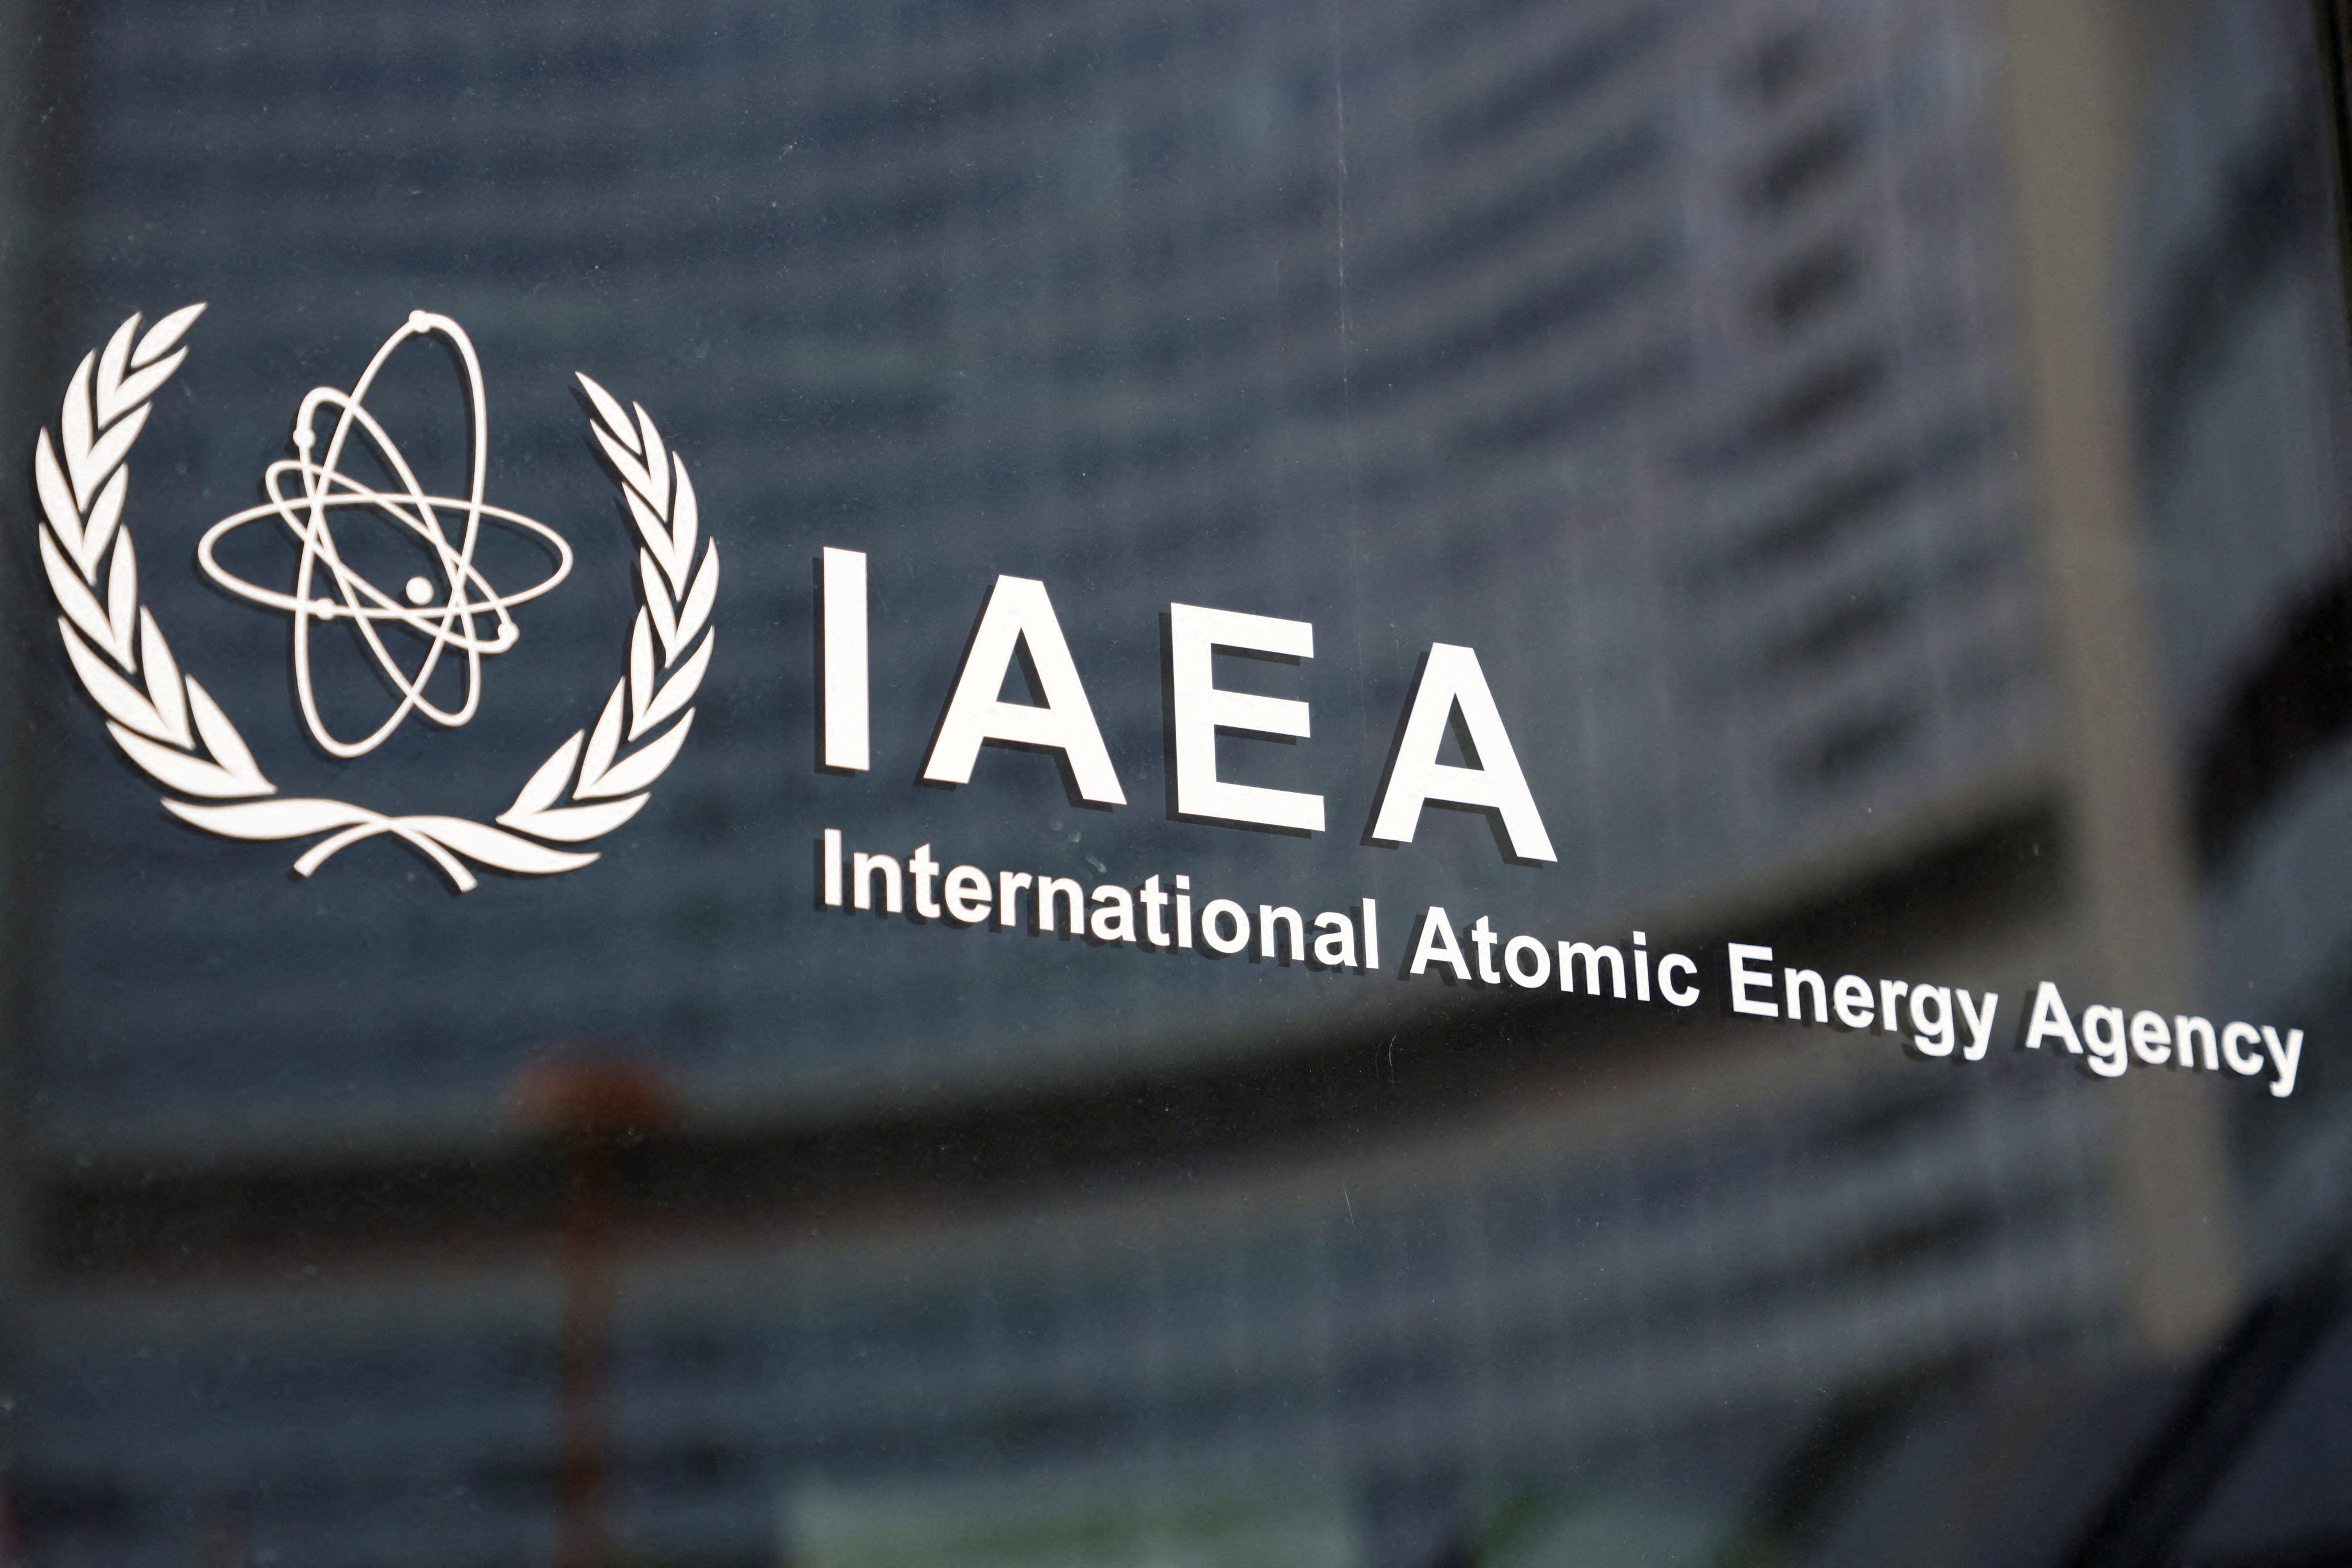 The logo of the International Atomic Energy Agency (IAEA) at the organisation’s headquarters in Vienna, Austria. Photo: Reuters